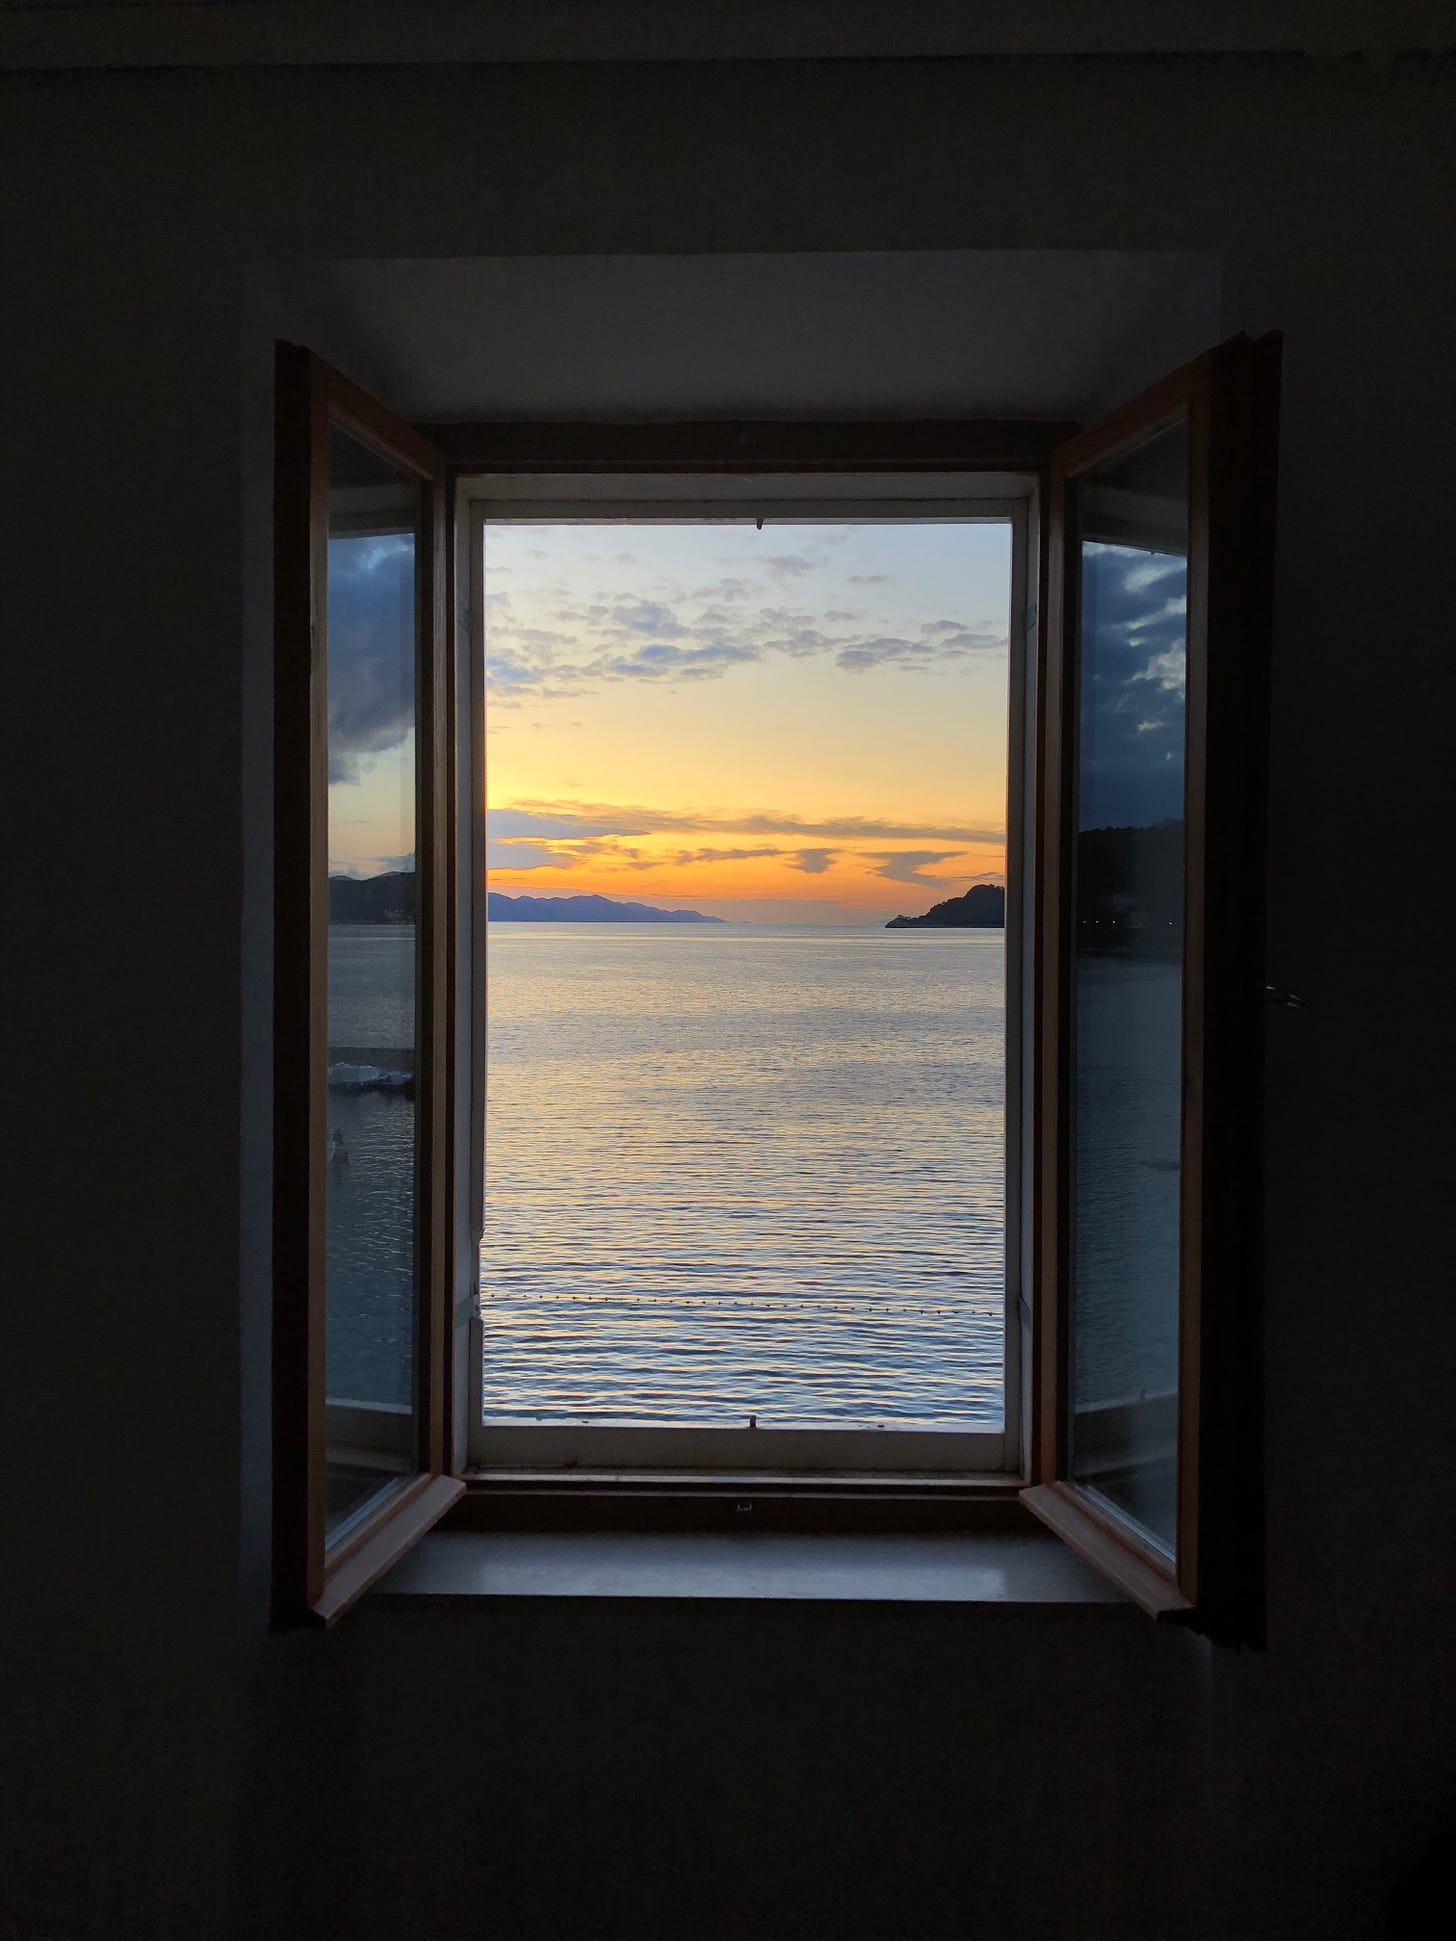 An open window that overlooks a calm sea with the sun setting across the horizon